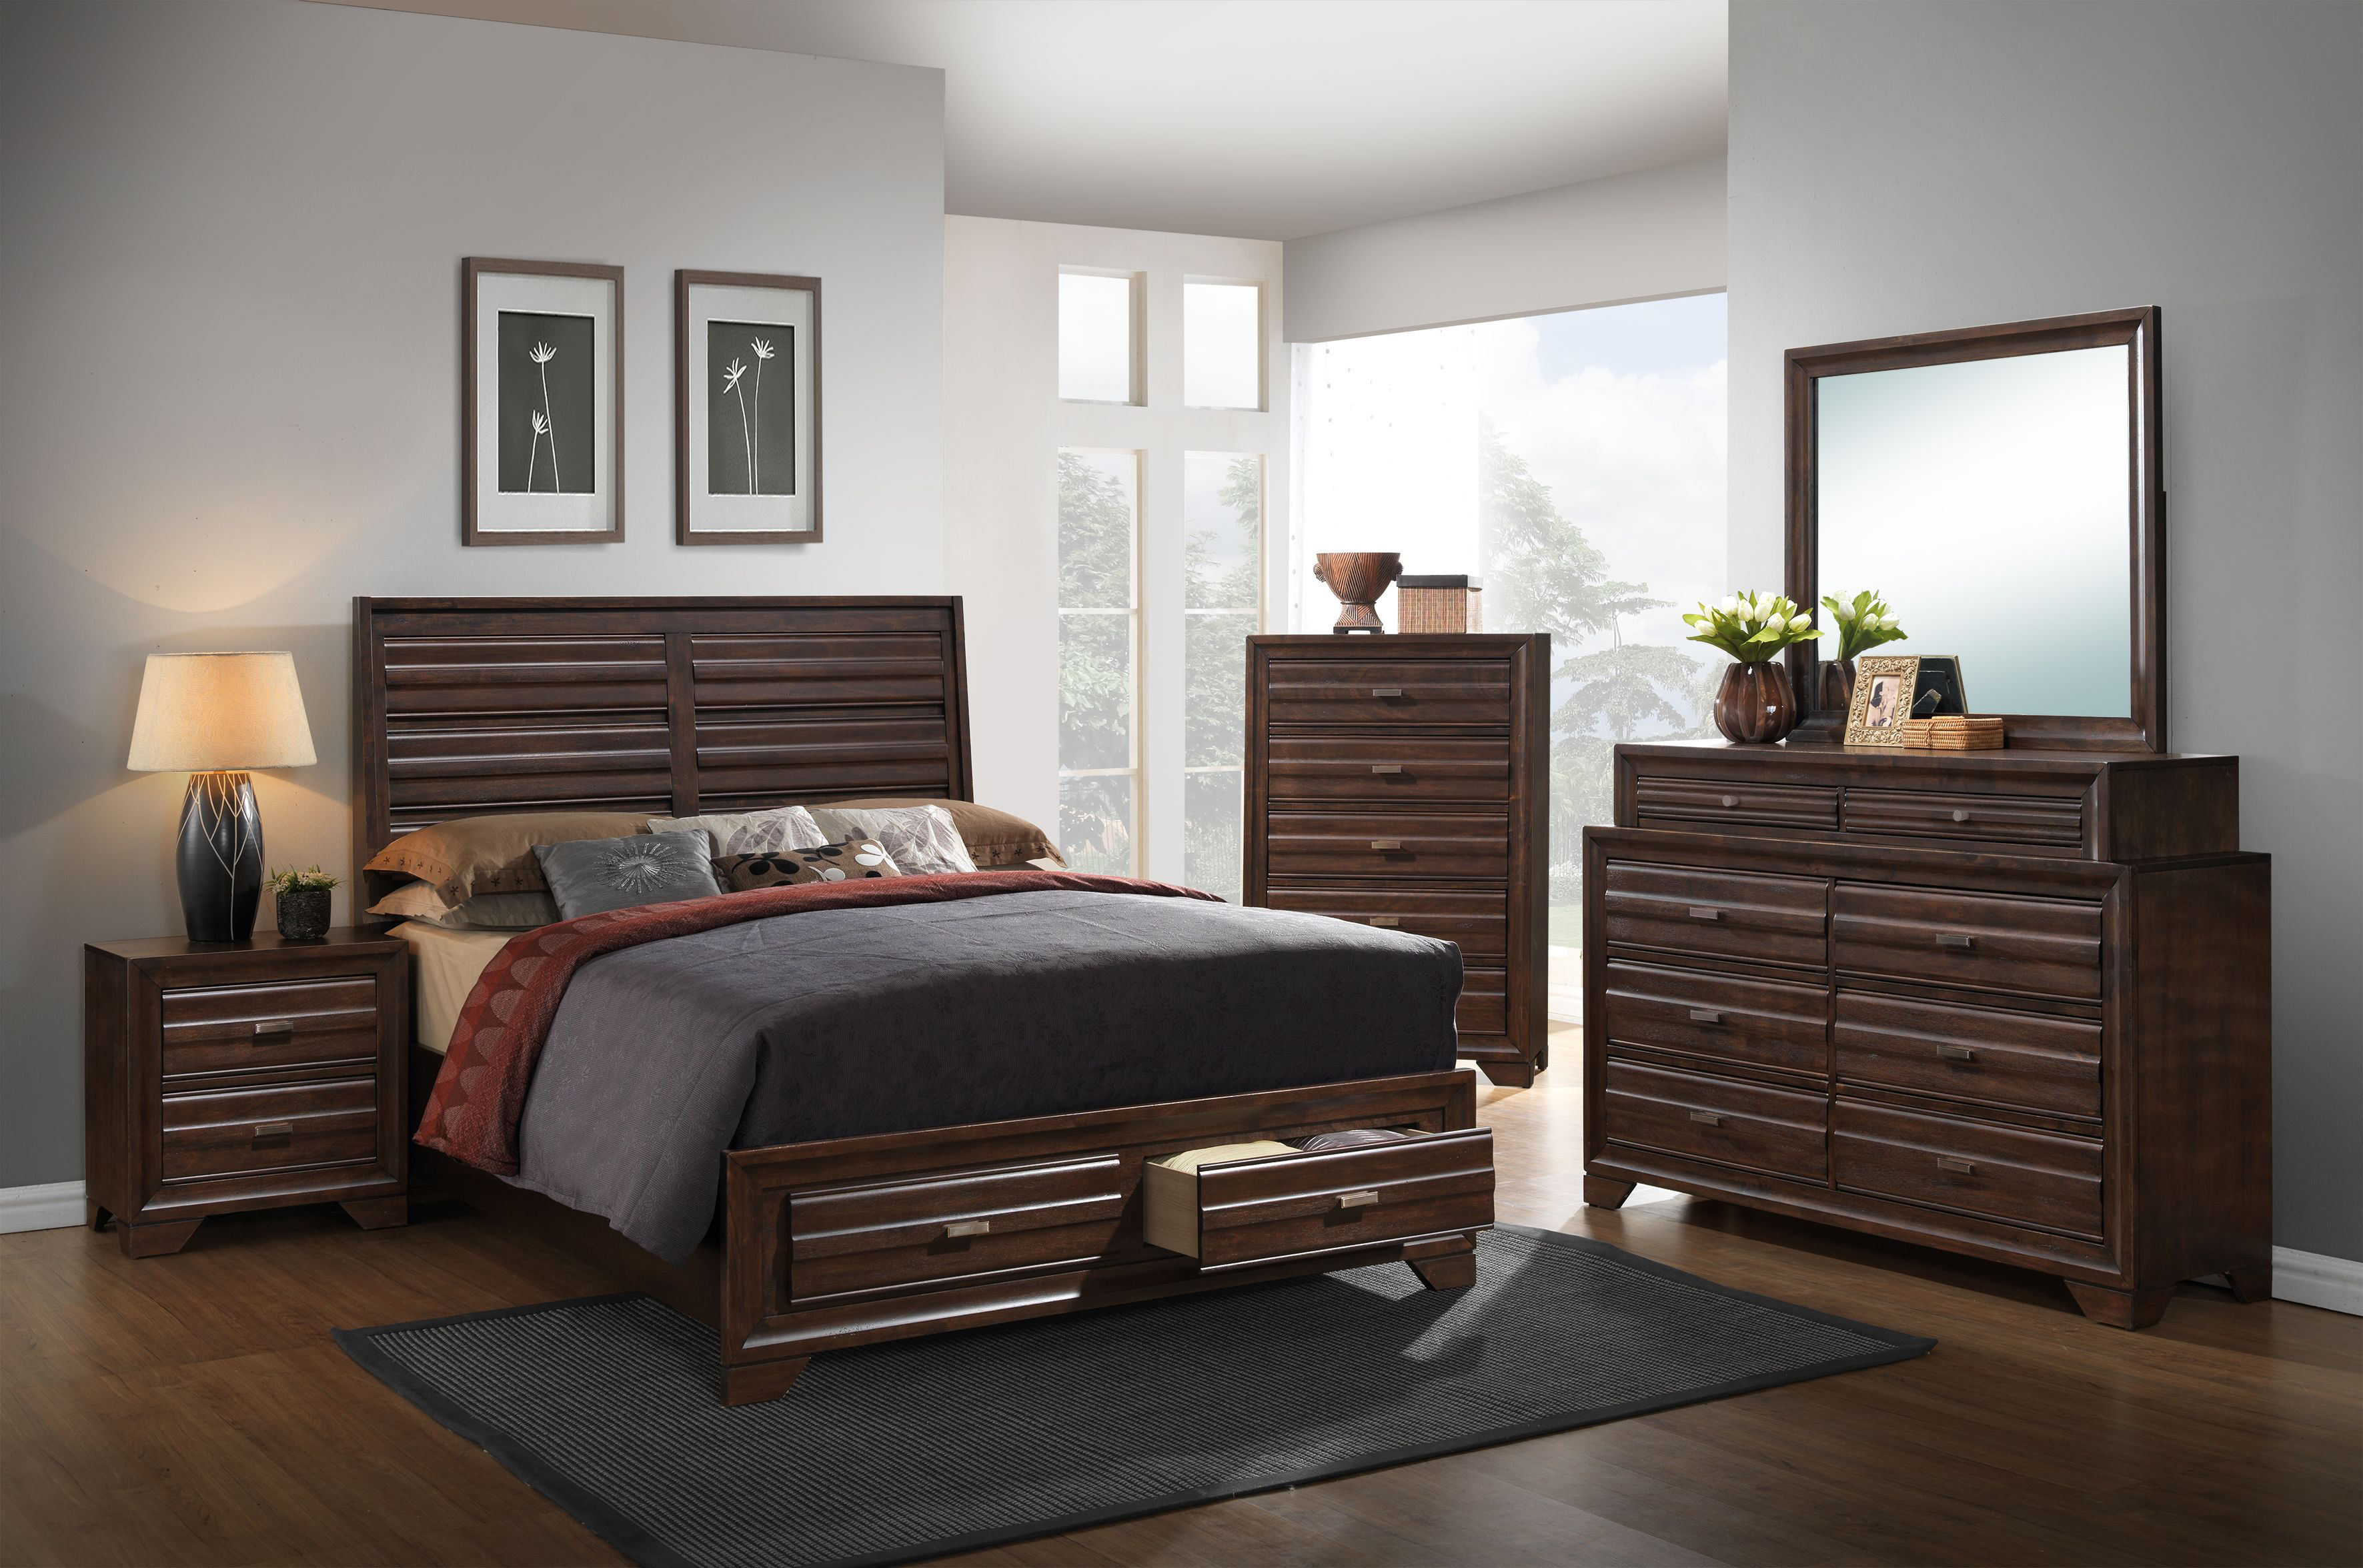 walnut lacquer bedroom furniture